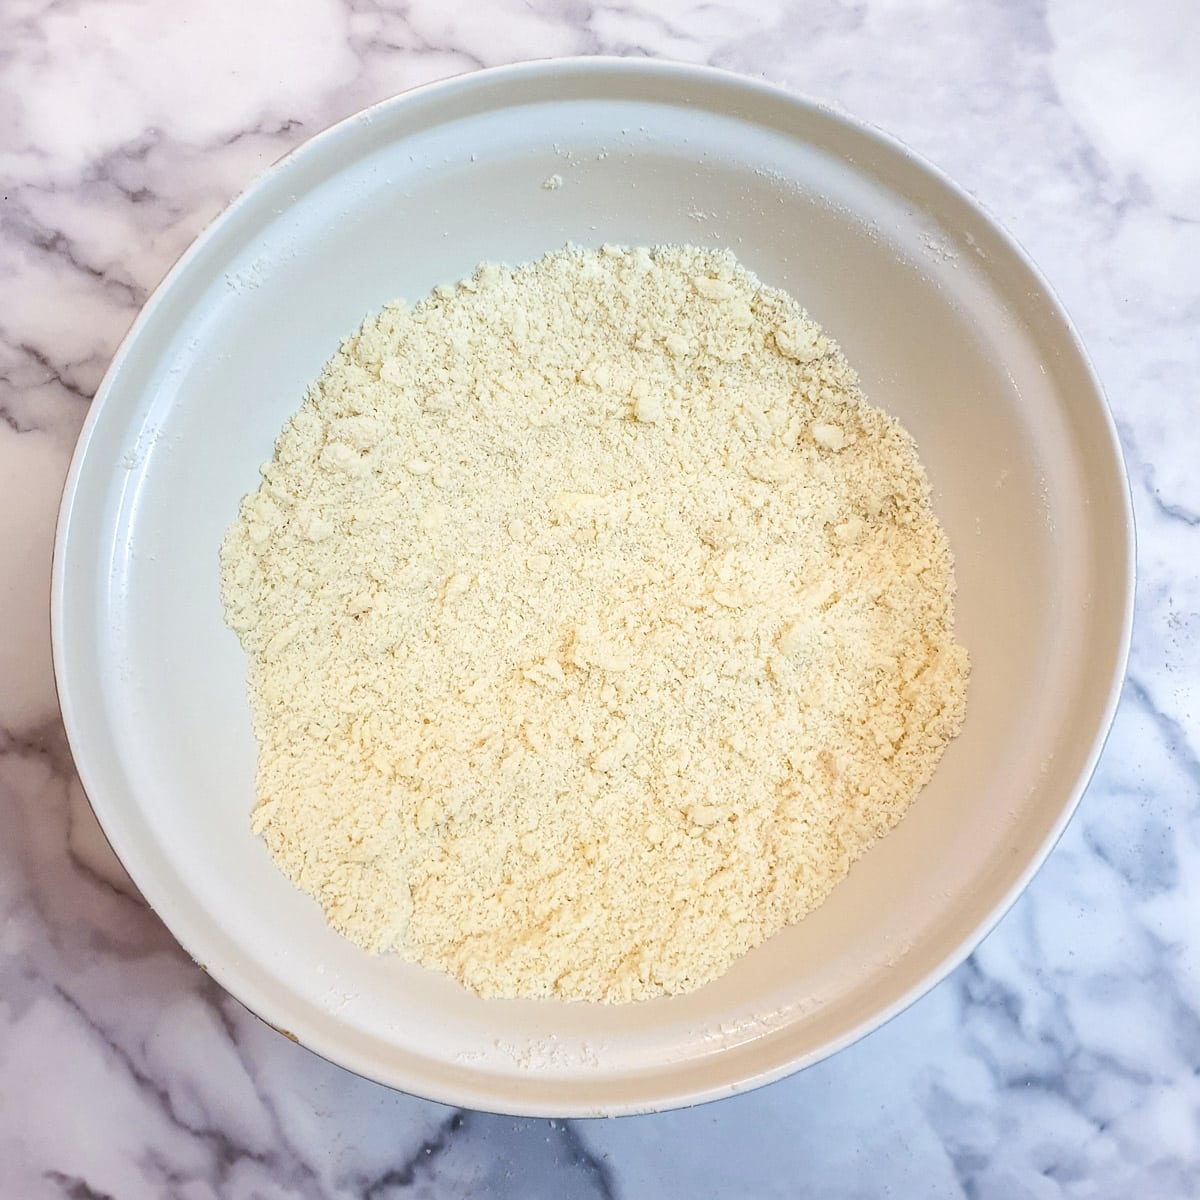 Flour and butter rubbed together to form fine breadcrumbs in a large white mixing bowl.